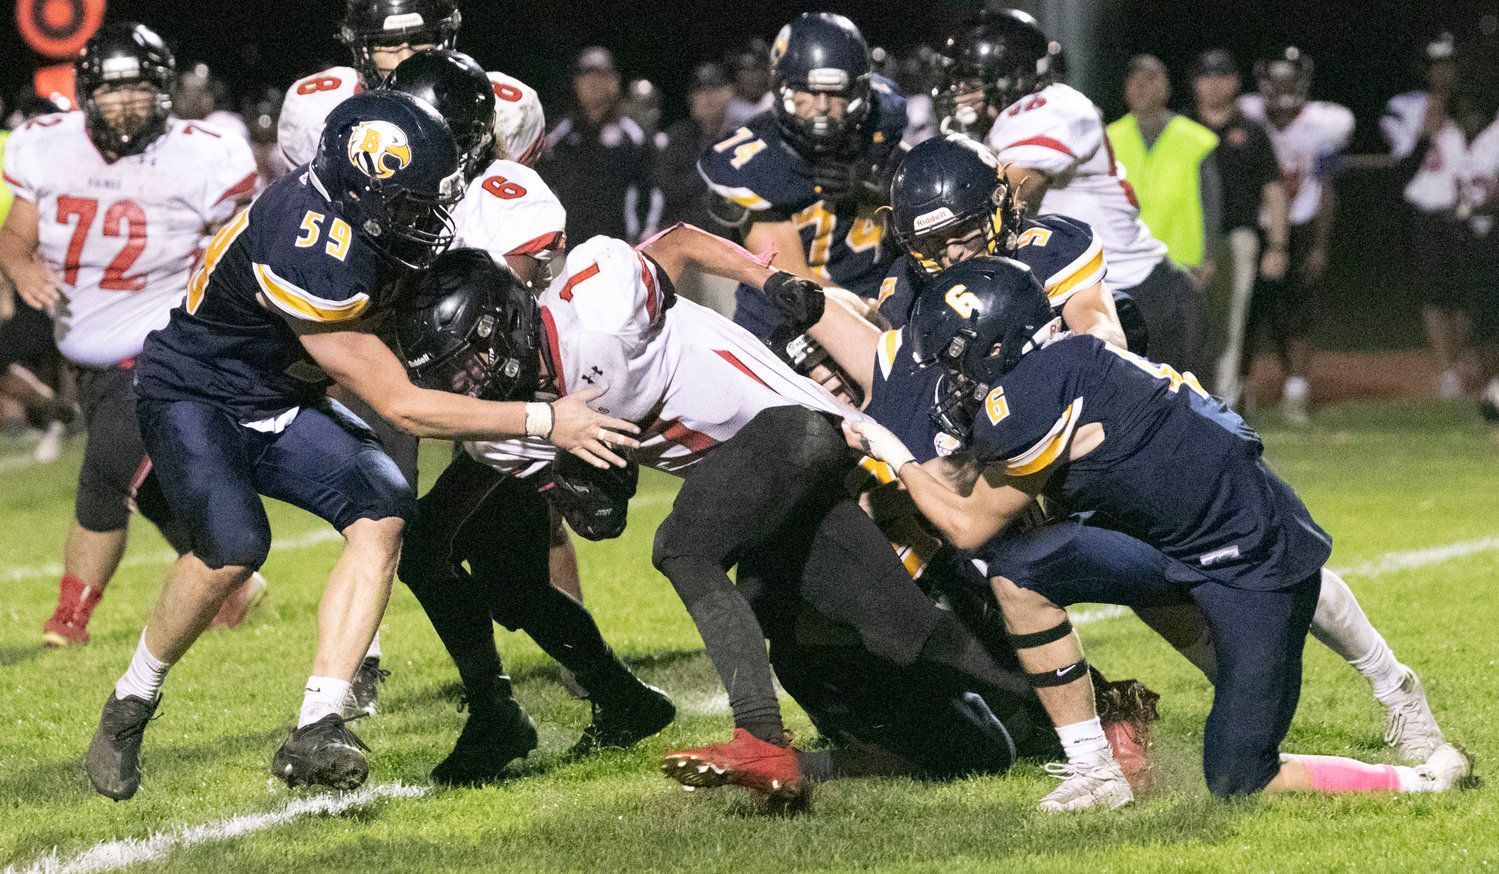 A gang of BHS defenders bring down an opposing running back during an earlier game this season.